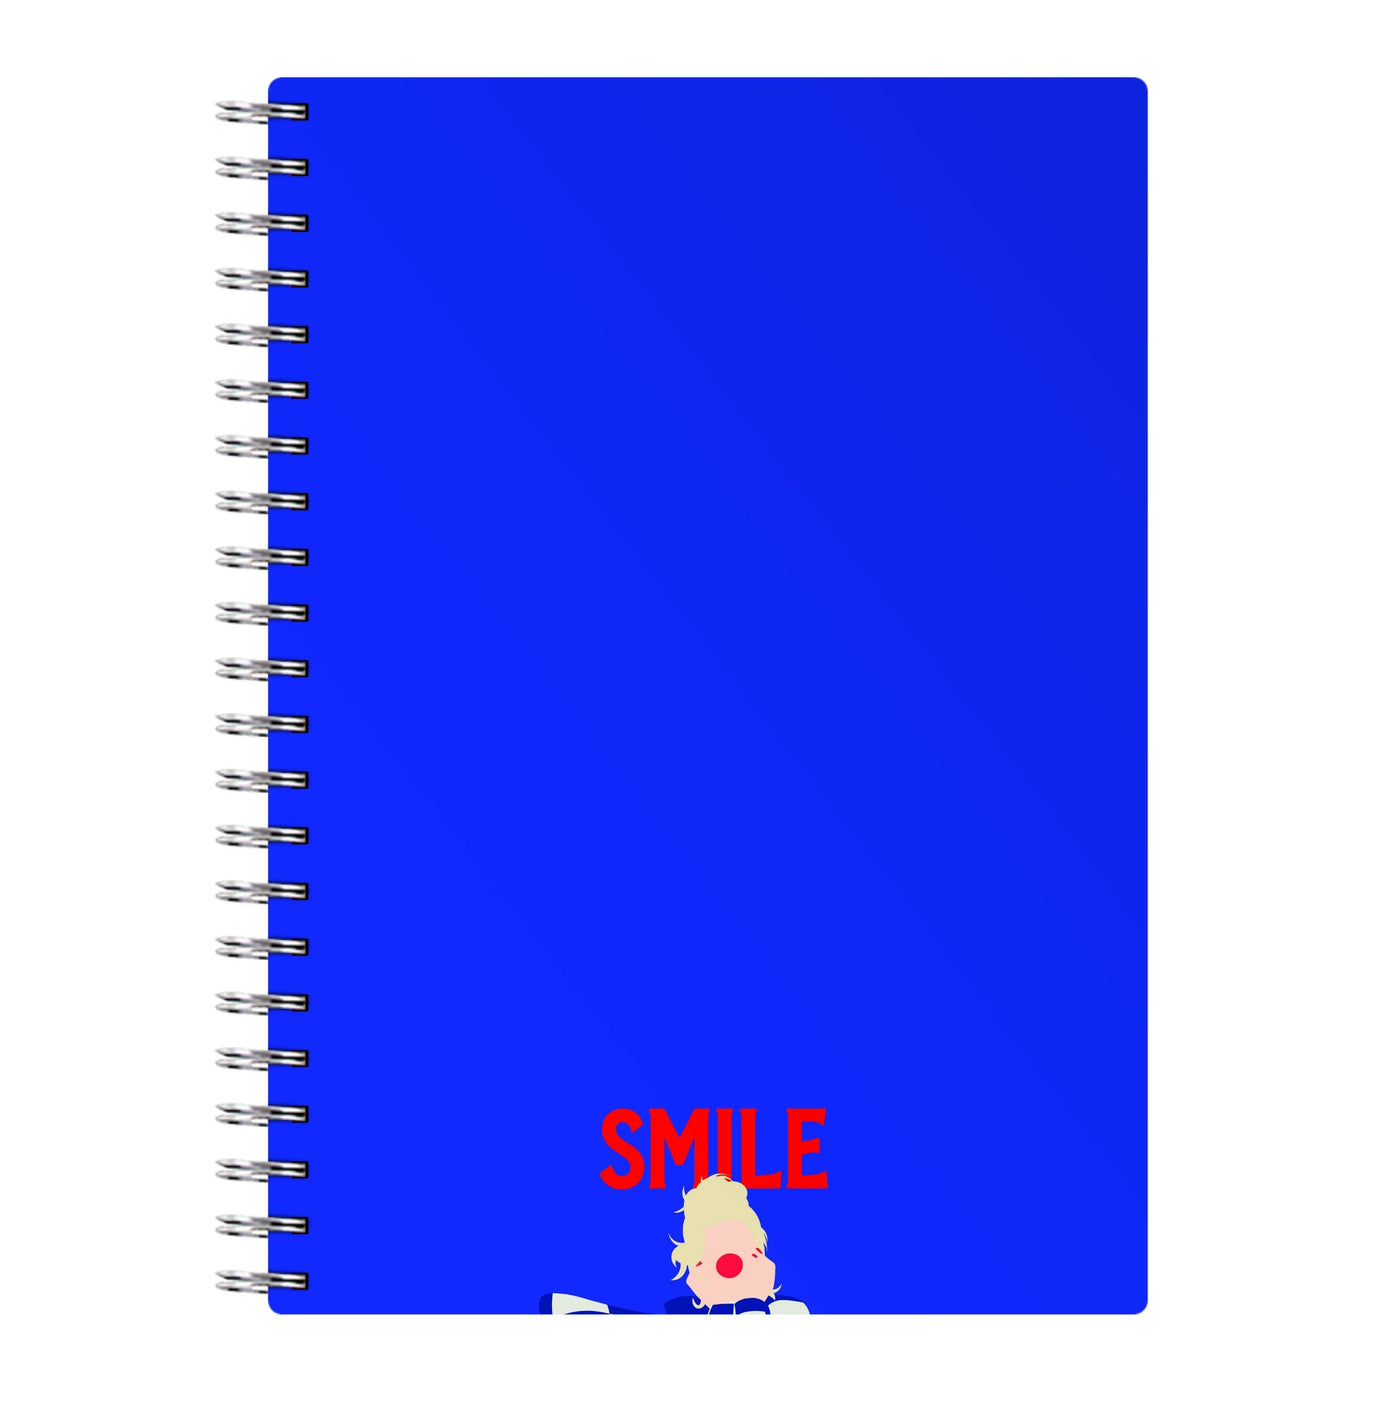 Smile - Katy Perry Notebook